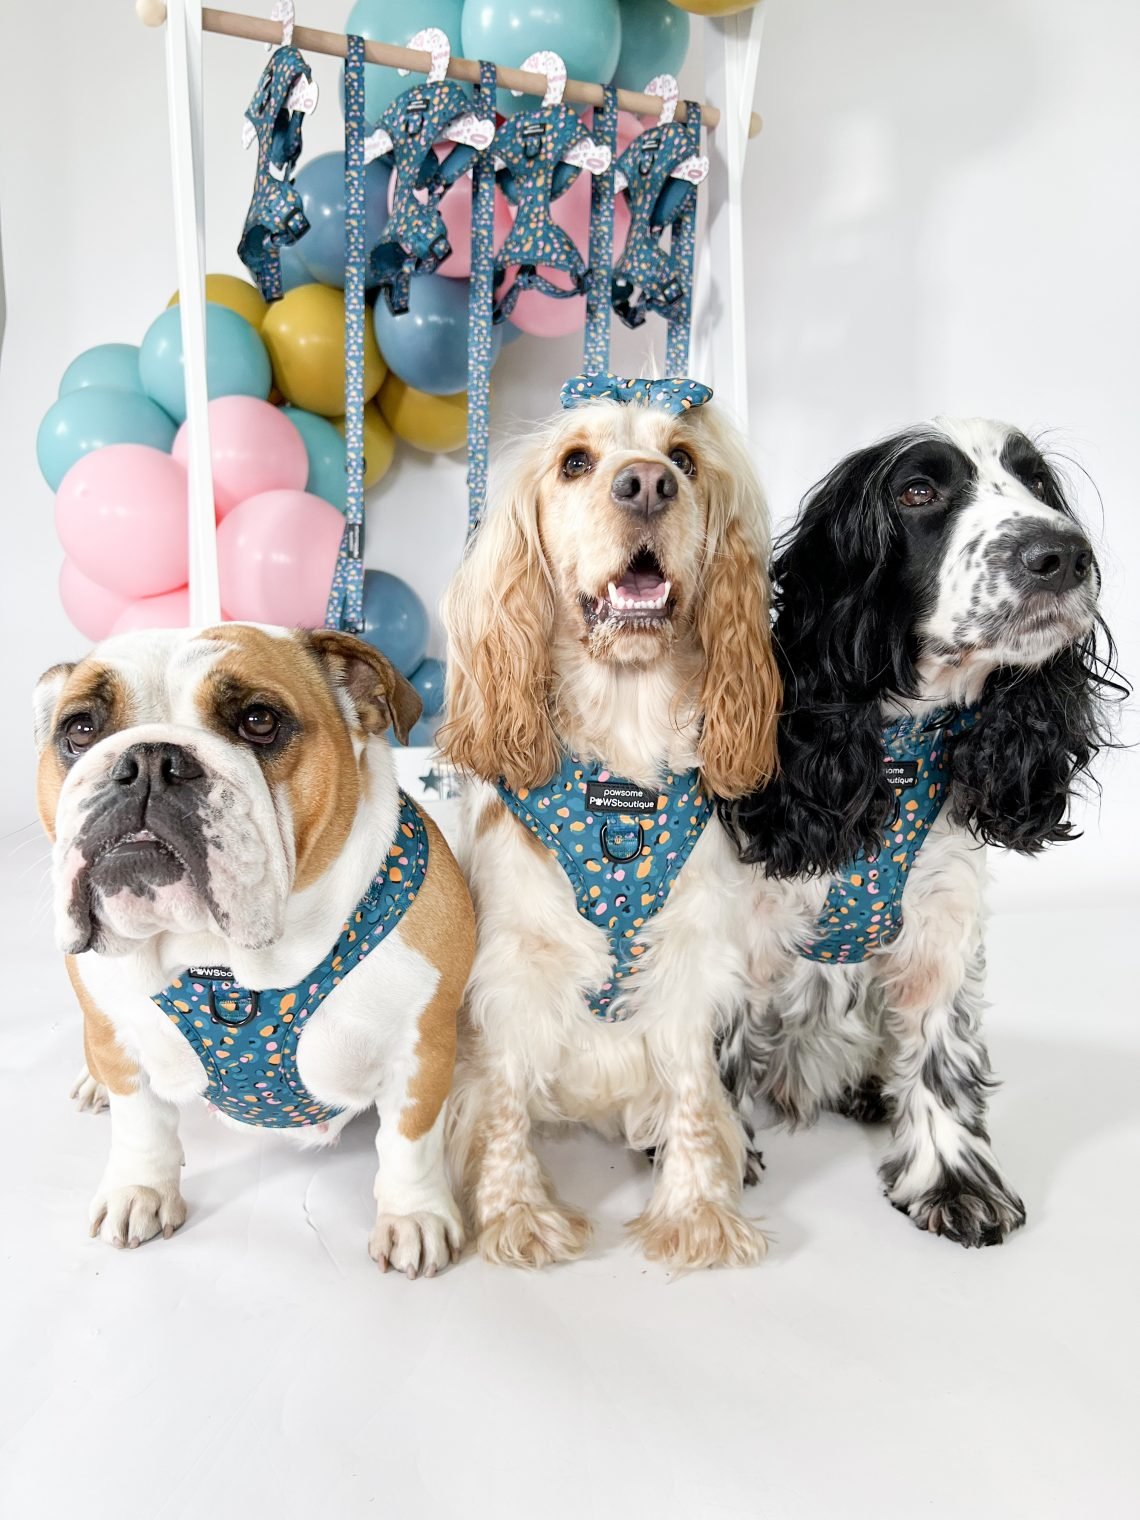 Three dogs posing with baloons and accessories